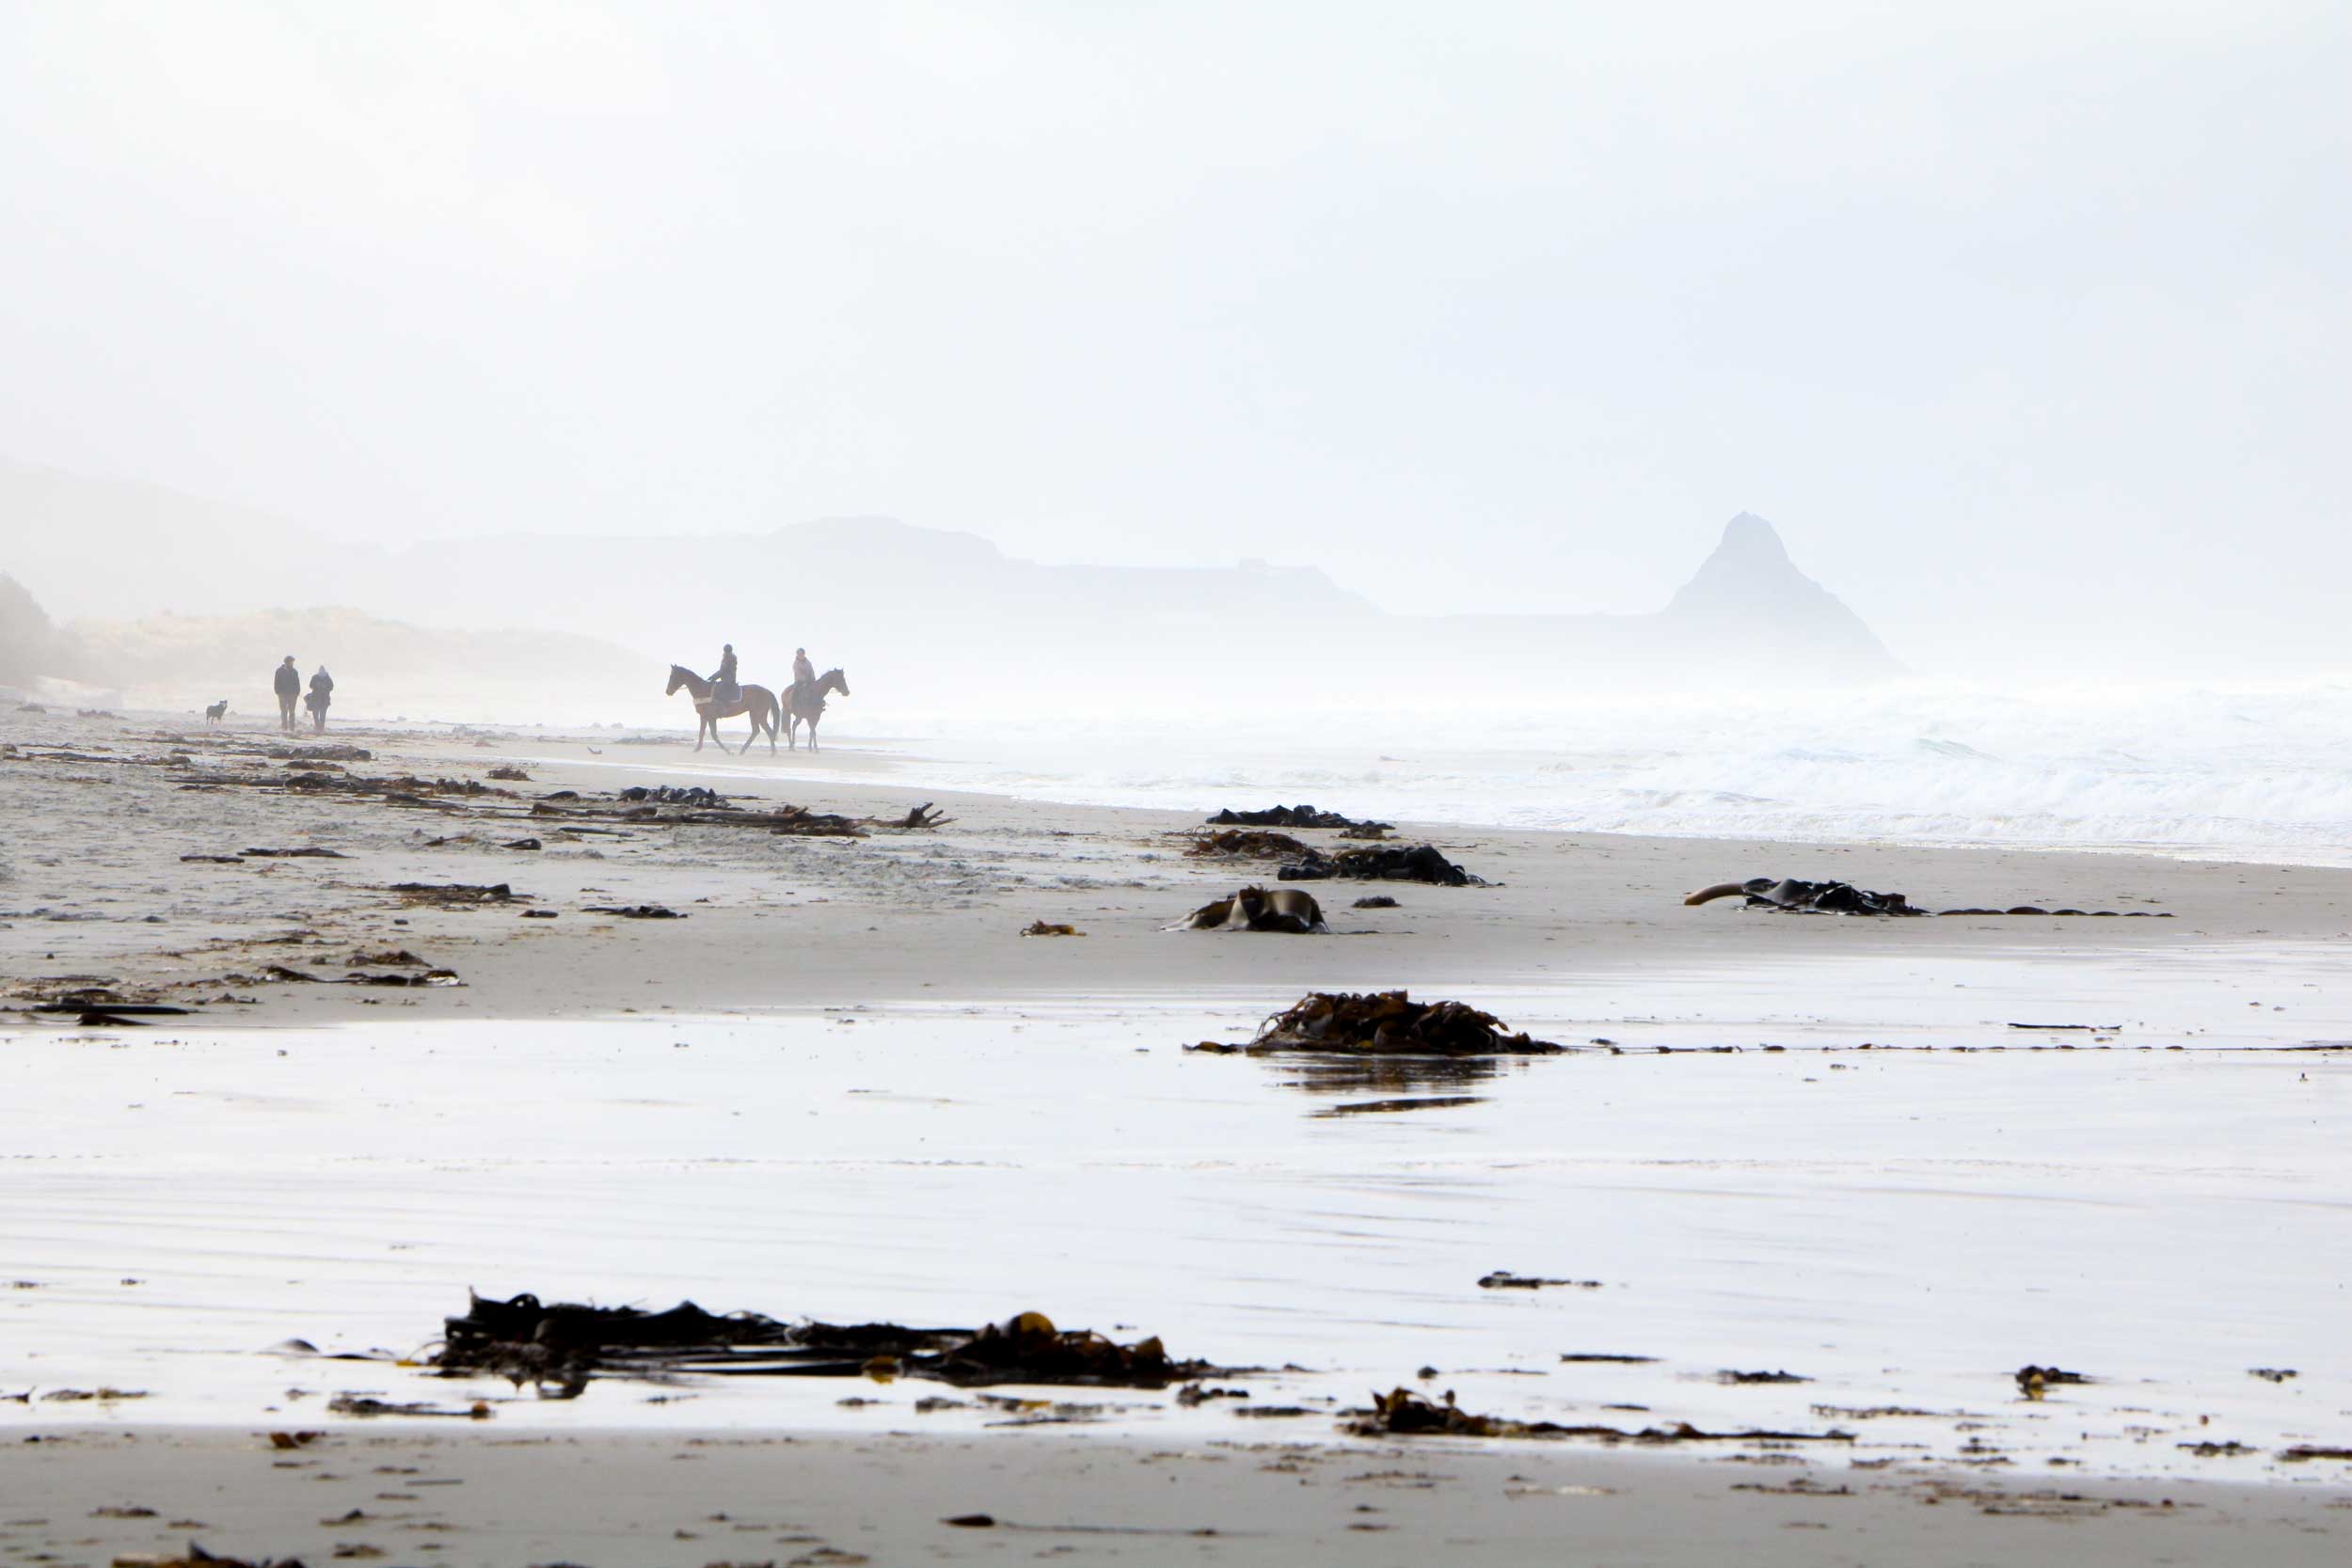 Misty image of two riders on horses and two walkers on a beach strewn with occasional clumps of sea kelp, Dunedin, New Zealand